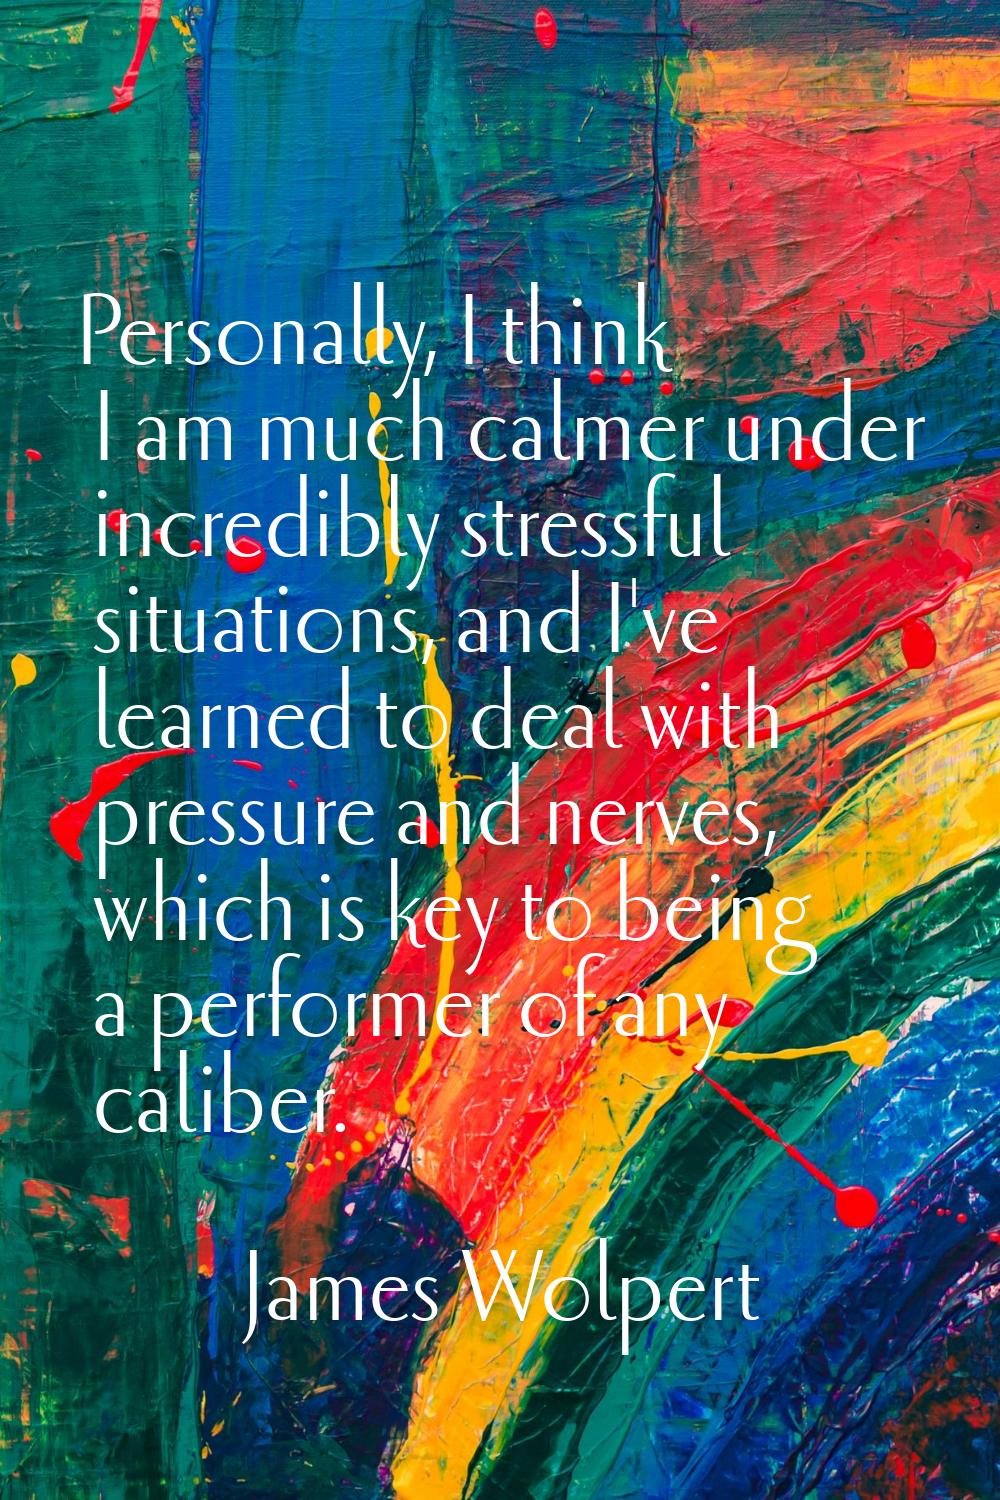 Personally, I think I am much calmer under incredibly stressful situations, and I've learned to dea